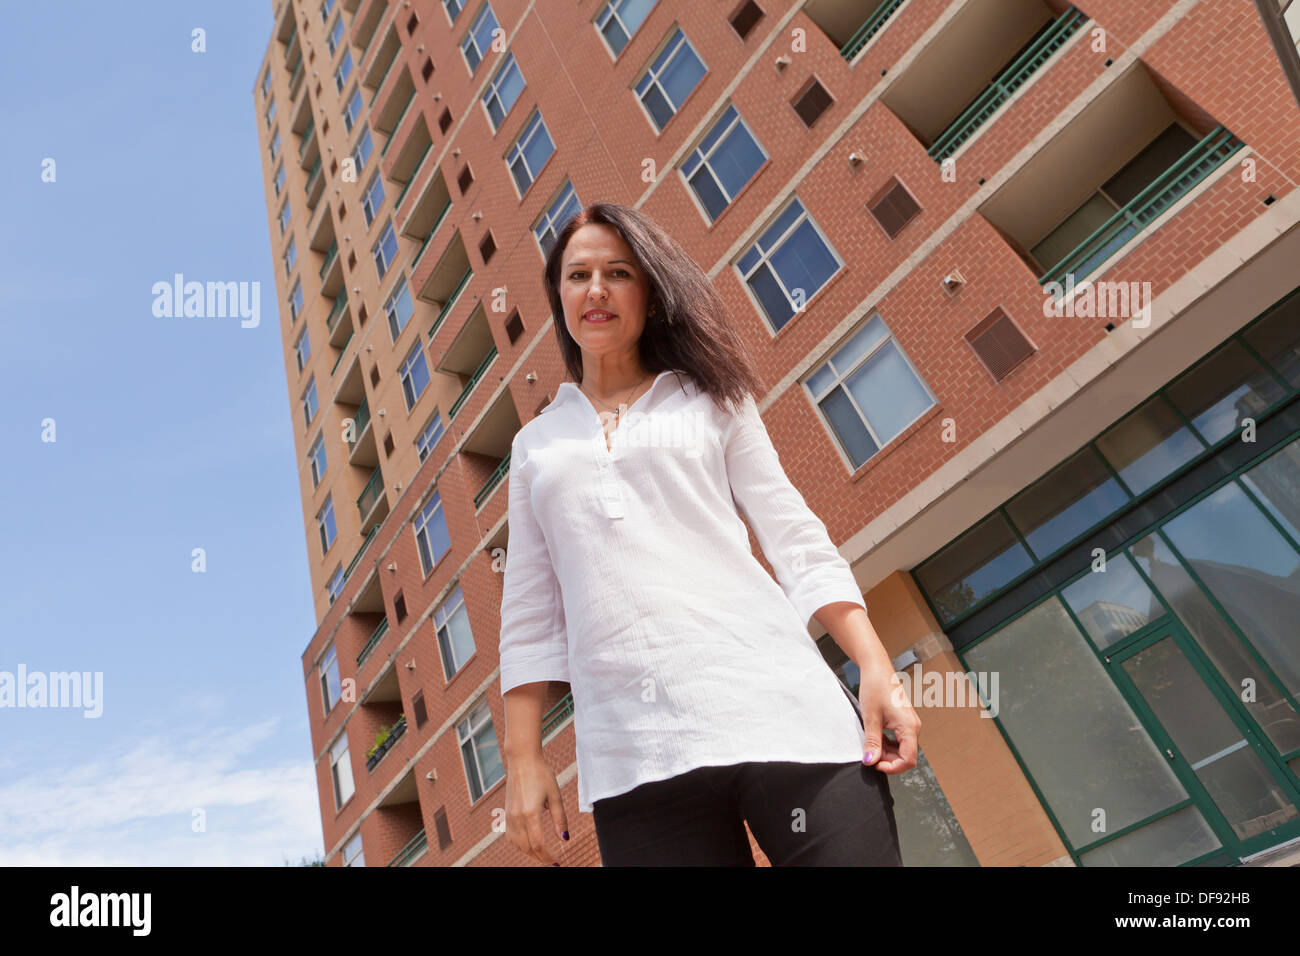 Middle aged woman standing in front of building Banque D'Images